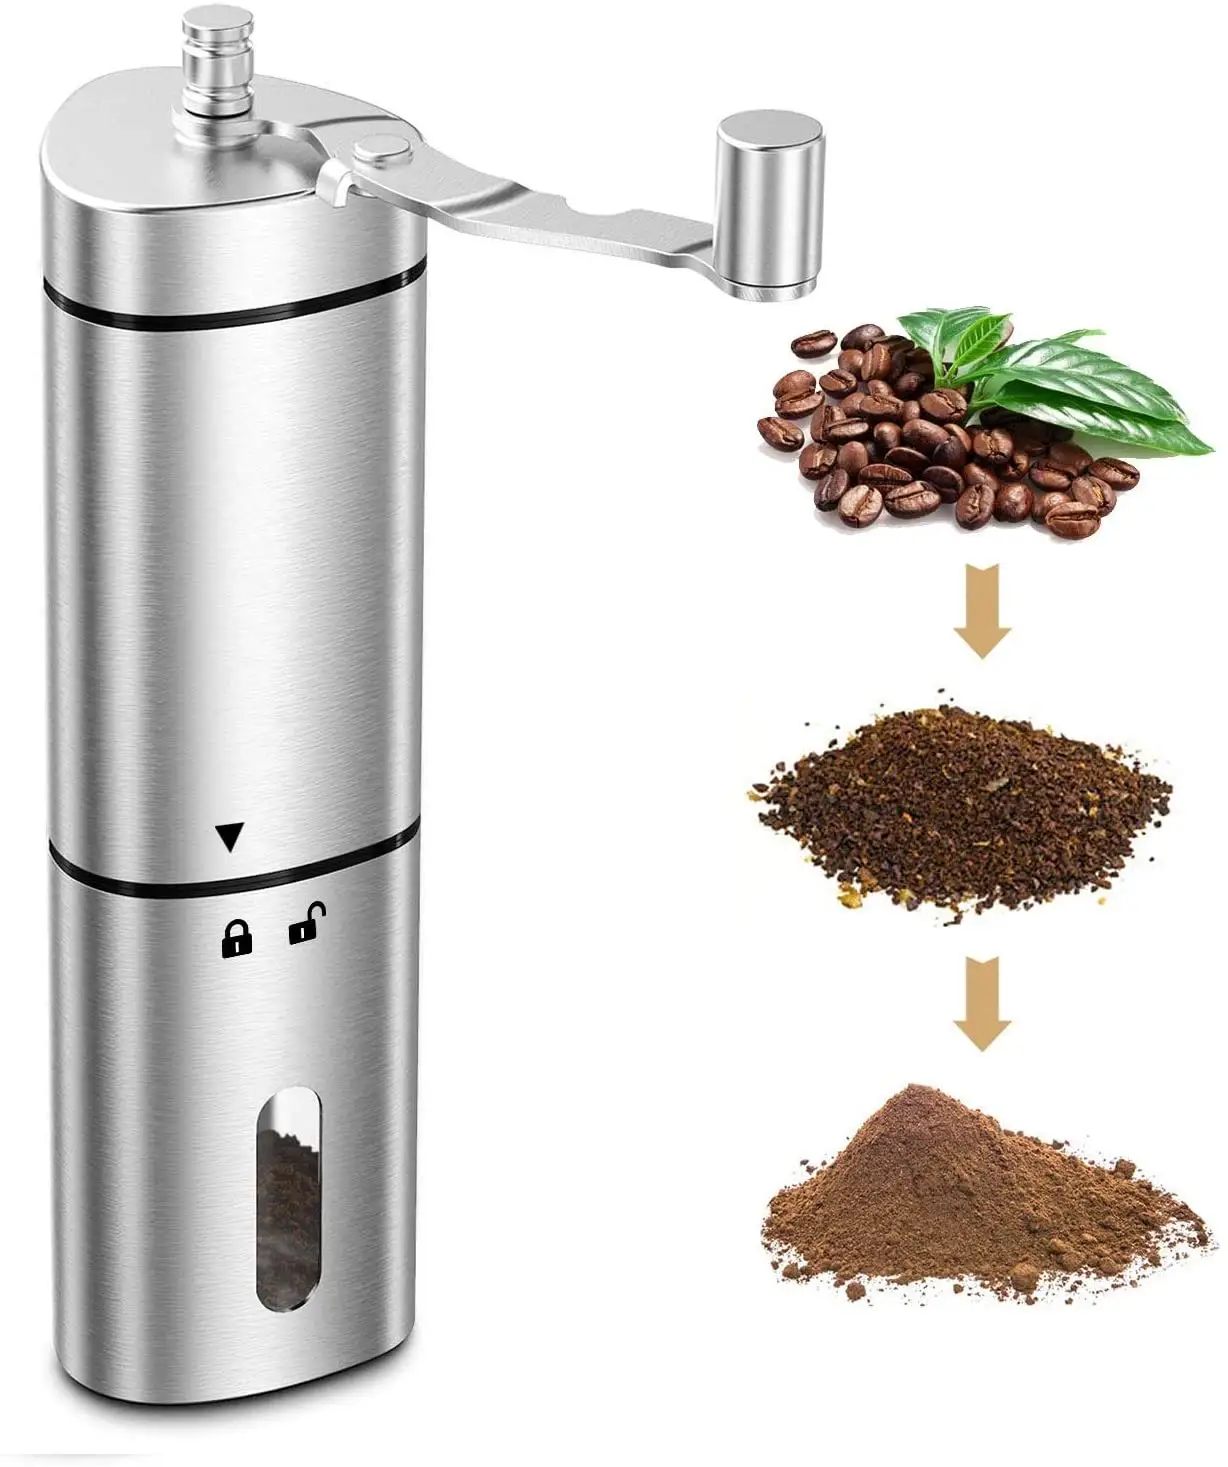 popular red bean grinder Portable Hand Stainless Steel coffee mill with Adjustable Setting Manual coffee grinder